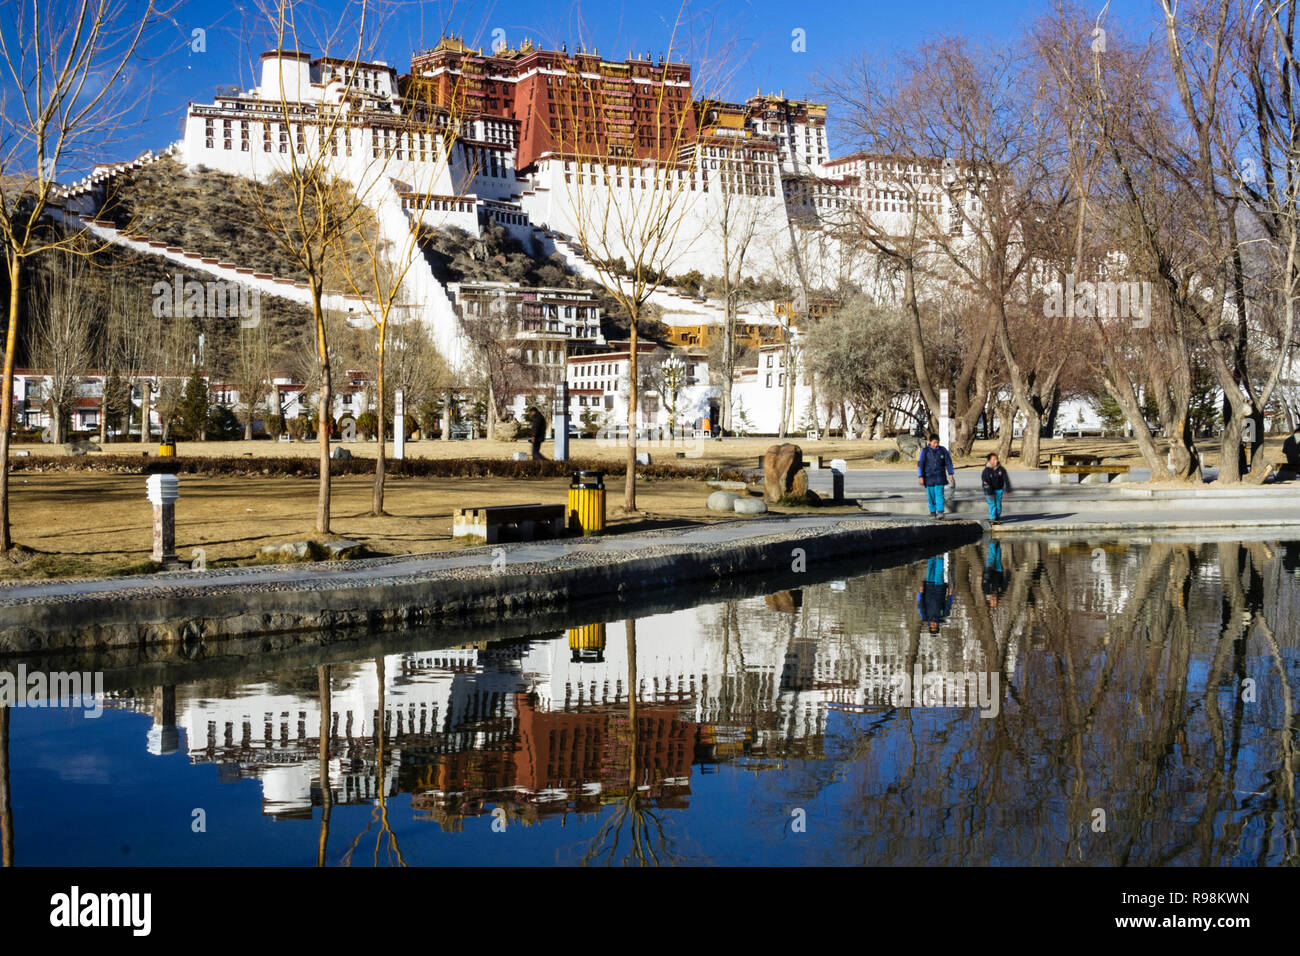 Lhasa, Tibet Autonomous Region, China : Potala palace. First built in 1645 by the 5th Dalai Lama, the Potala was the residence of the Dalai Lama until Stock Photo